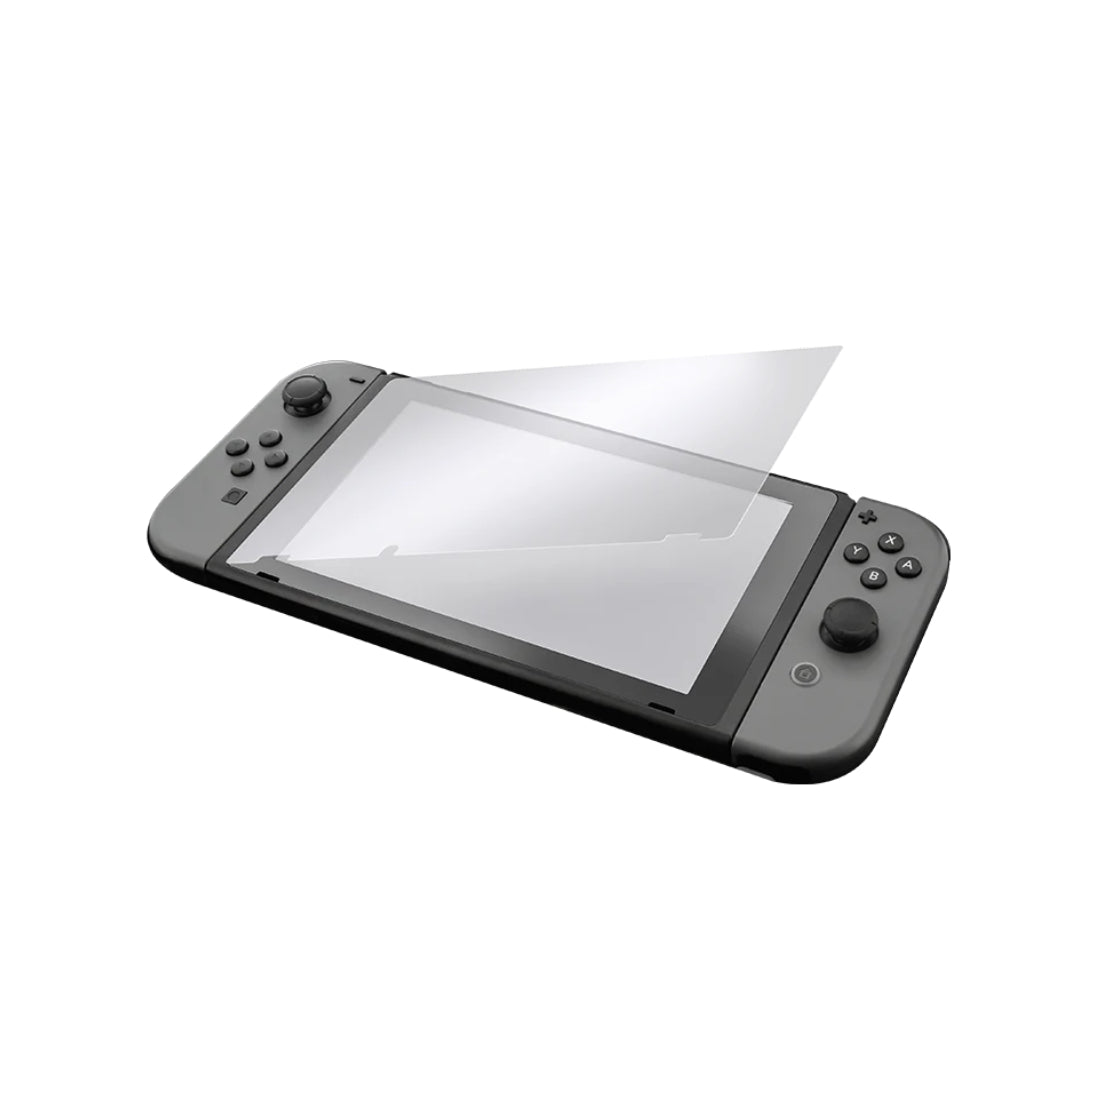 Nyko Screen Armor for Nintendo Switch - Store 974 | ستور ٩٧٤